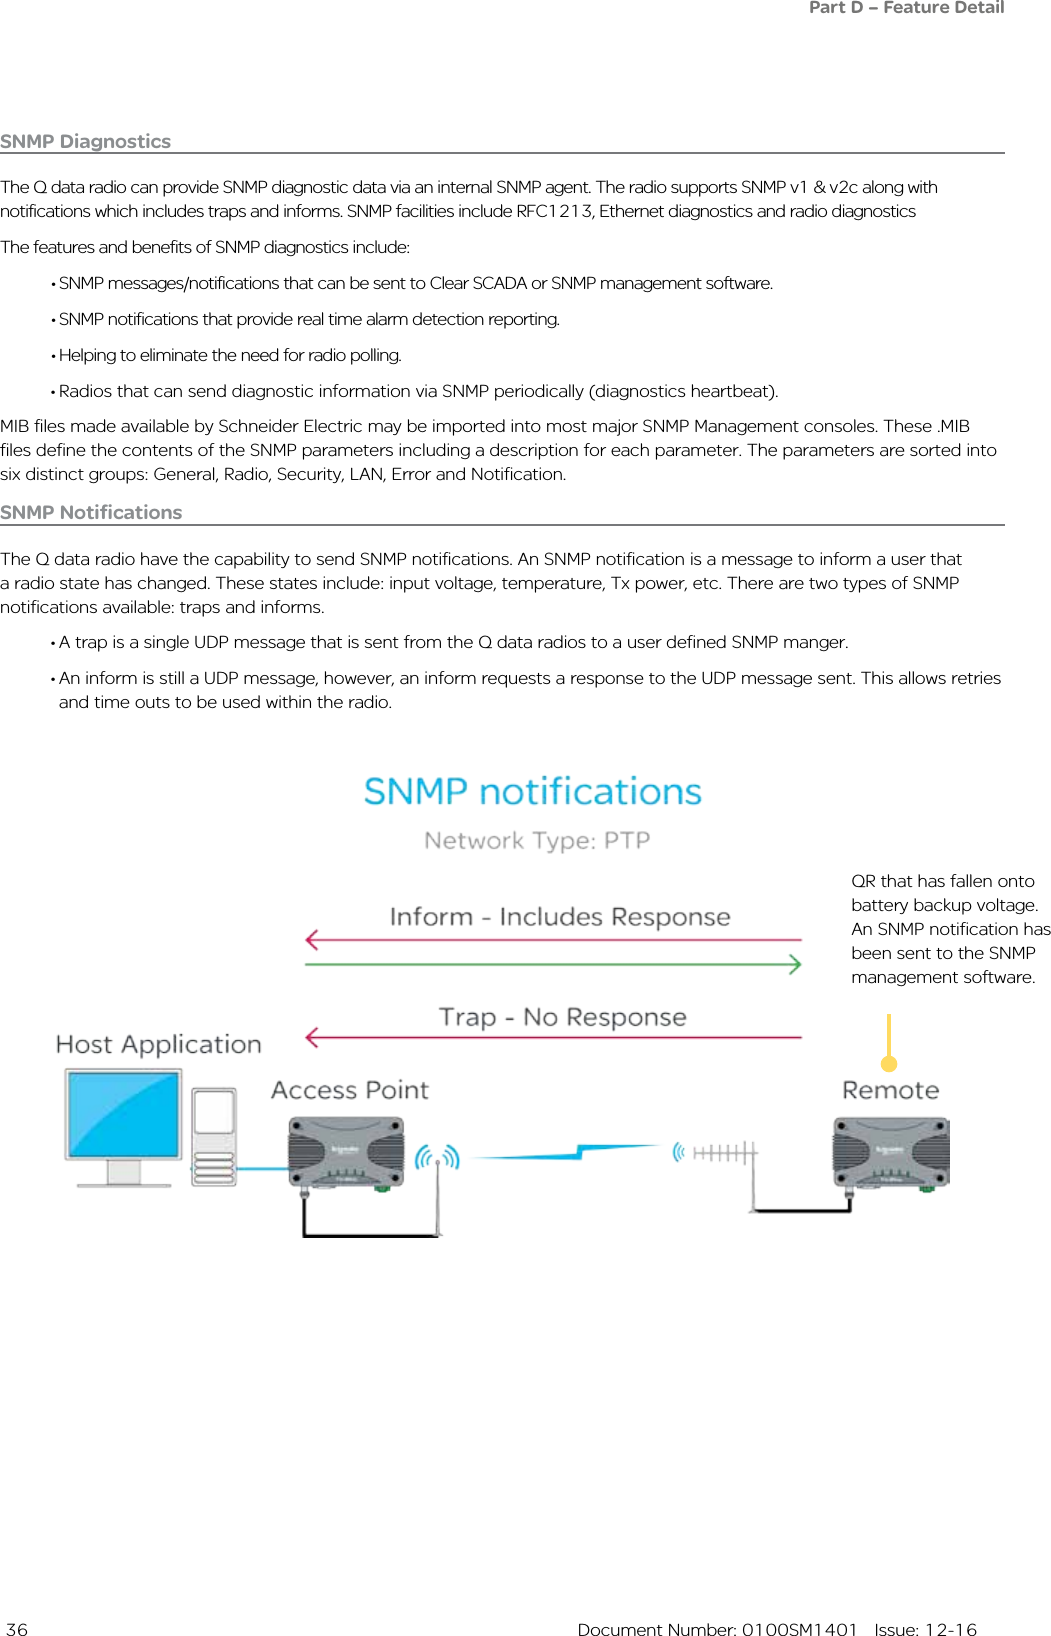  36  Document Number: 0100SM1401   Issue: 12-16SNMP DiagnosticsThe Q data radio can provide SNMP diagnostic data via an internal SNMP agent. The radio supports SNMP v1 &amp; v2c along with notifications which includes traps and informs. SNMP facilities include RFC1213, Ethernet diagnostics and radio diagnosticsThe features and benefits of SNMP diagnostics include:• SNMP messages/notifications that can be sent to Clear SCADA or SNMP management software.• SNMP notifications that provide real time alarm detection reporting.• Helping to eliminate the need for radio polling.• Radios that can send diagnostic information via SNMP periodically (diagnostics heartbeat).MIB files made available by Schneider Electric may be imported into most major SNMP Management consoles. These .MIB files define the contents of the SNMP parameters including a description for each parameter. The parameters are sorted into six distinct groups: General, Radio, Security, LAN, Error and Notification.SNMP NotificationsThe Q data radio have the capability to send SNMP notifications. An SNMP notification is a message to inform a user that a radio state has changed. These states include: input voltage, temperature, Tx power, etc. There are two types of SNMP notifications available: traps and informs.• A trap is a single UDP message that is sent from the Q data radios to a user defined SNMP manger. • An inform is still a UDP message, however, an inform requests a response to the UDP message sent. This allows retries and time outs to be used within the radio. QR that has fallen onto battery backup voltage. An SNMP notification has been sent to the SNMP management software.Part D – Feature Detail